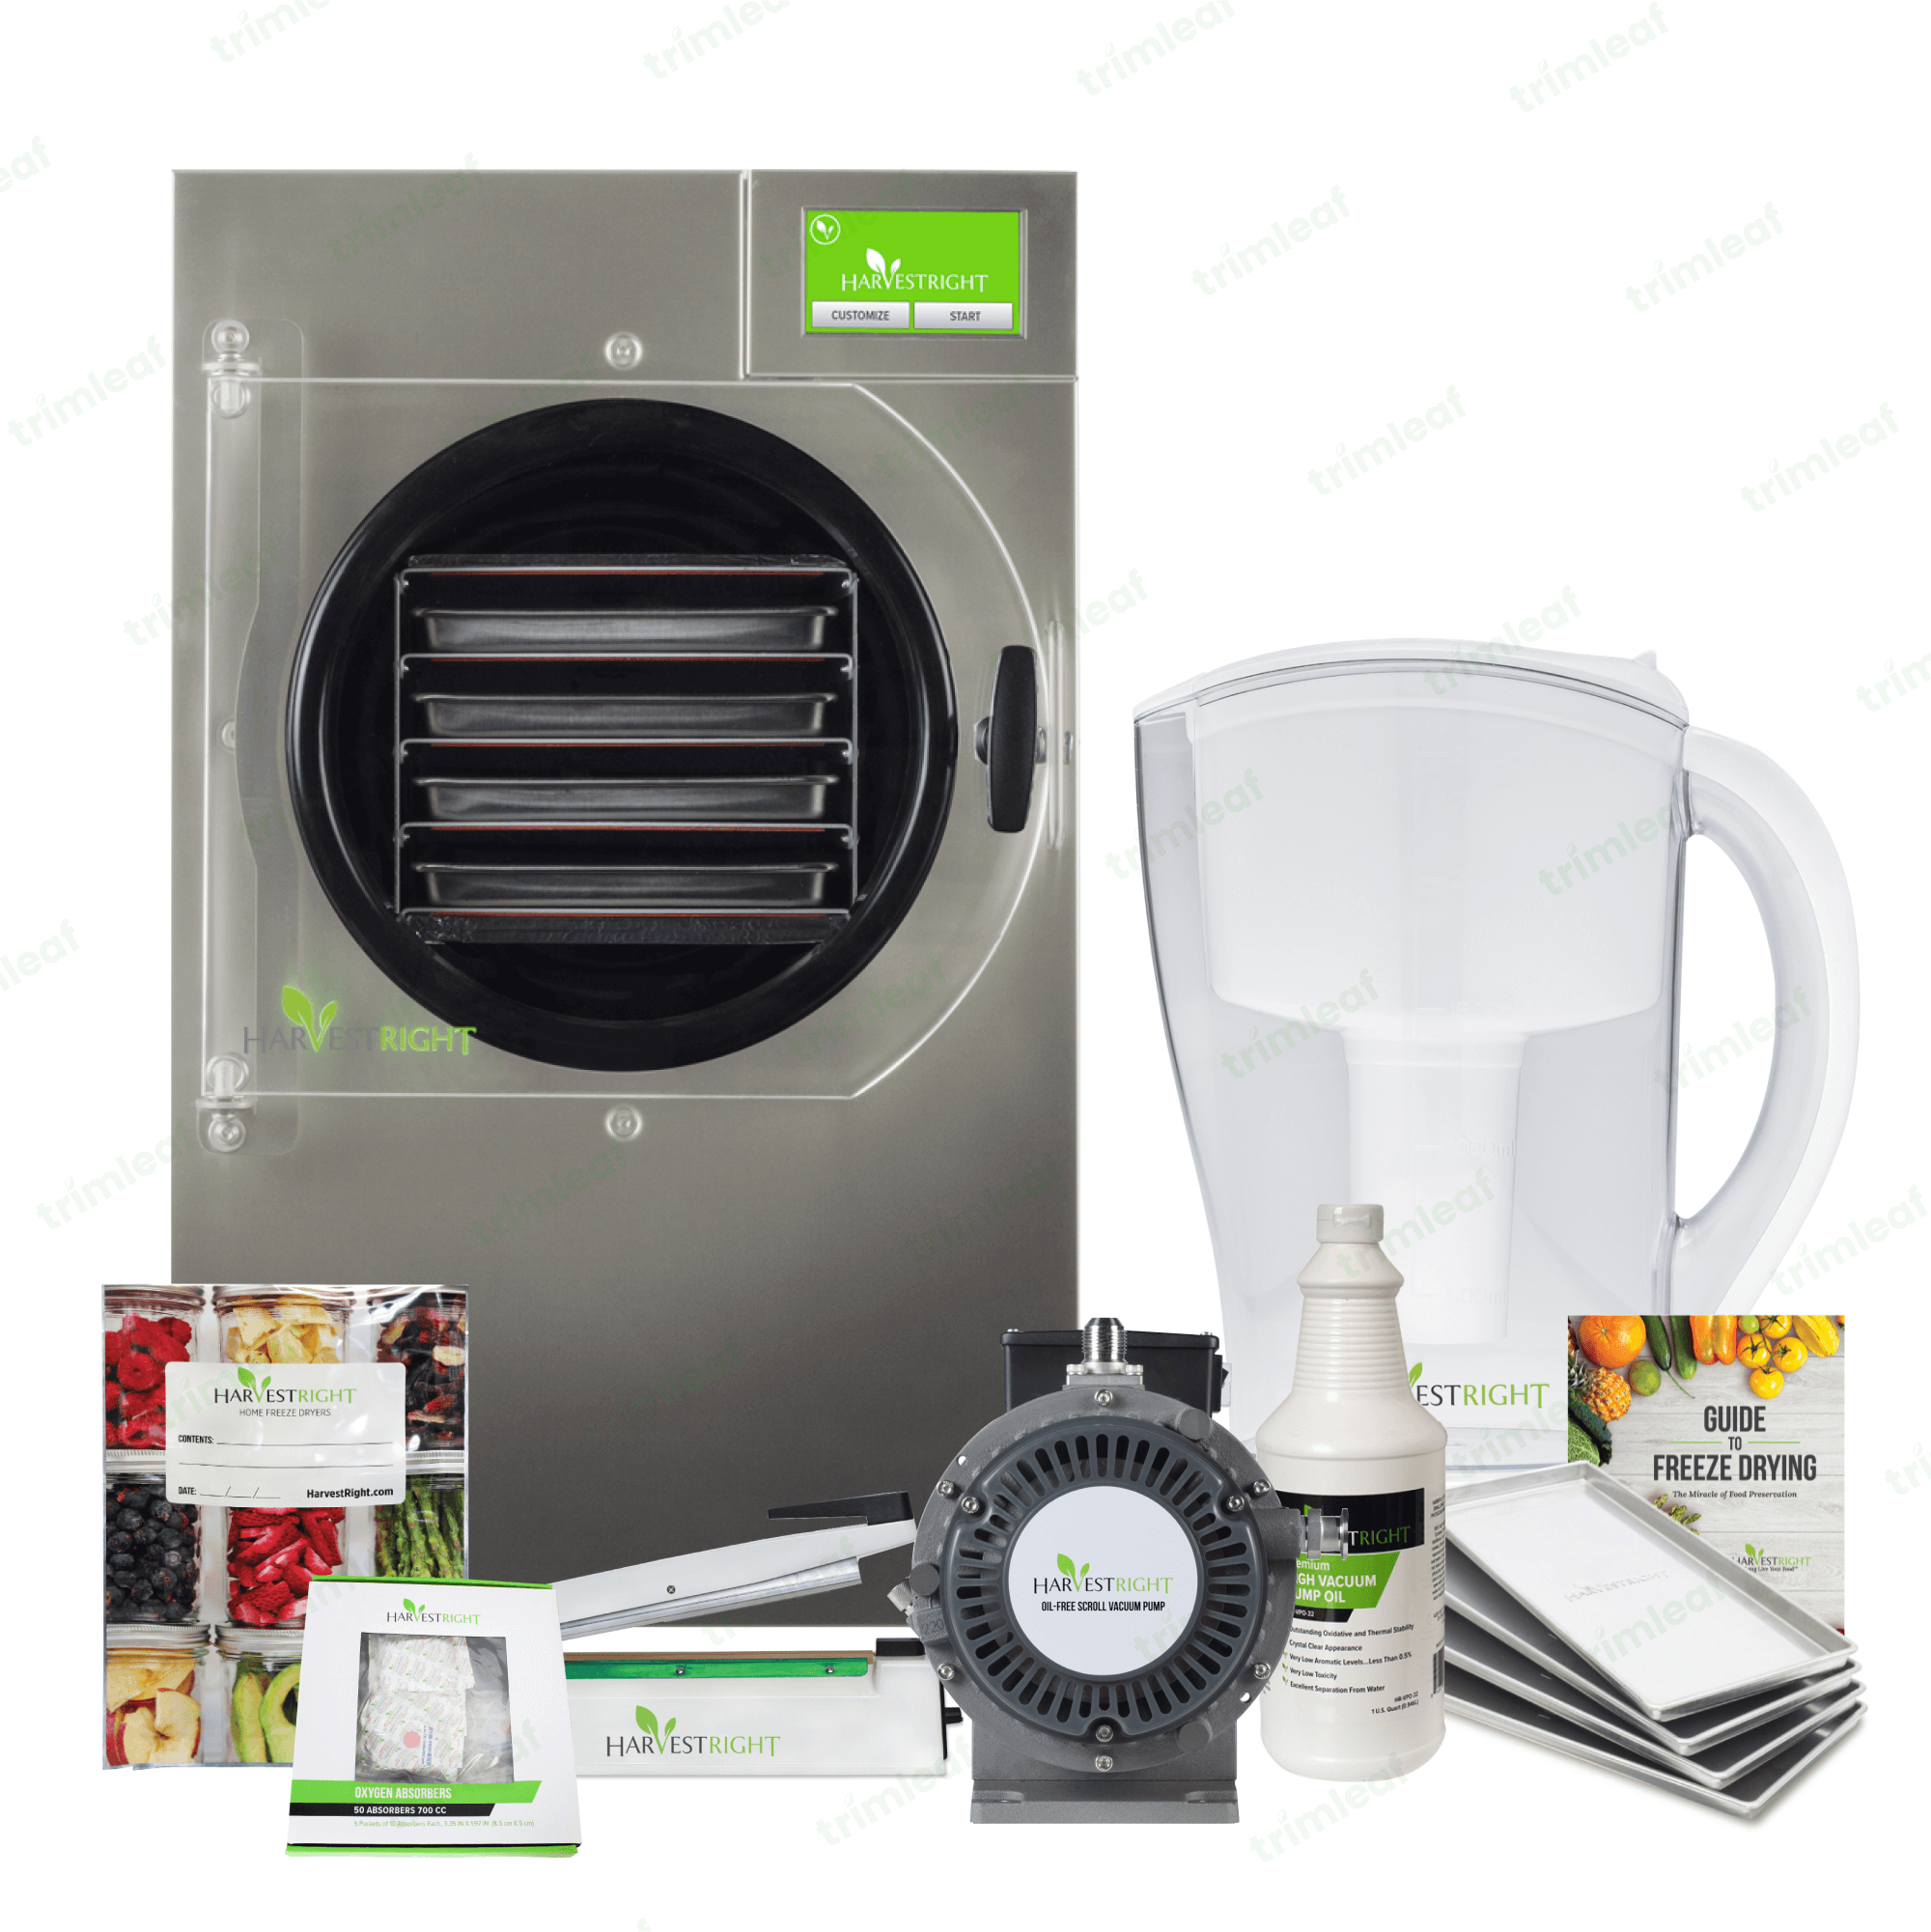 https://trimleaf.com/cdn/shop/files/harvest-right-oil-free-pump-harvest-right-4-tray-small-pro-stainless-steel-home-freeze-dryer-w-mylar-kit-39888096559320.png?v=1699311464